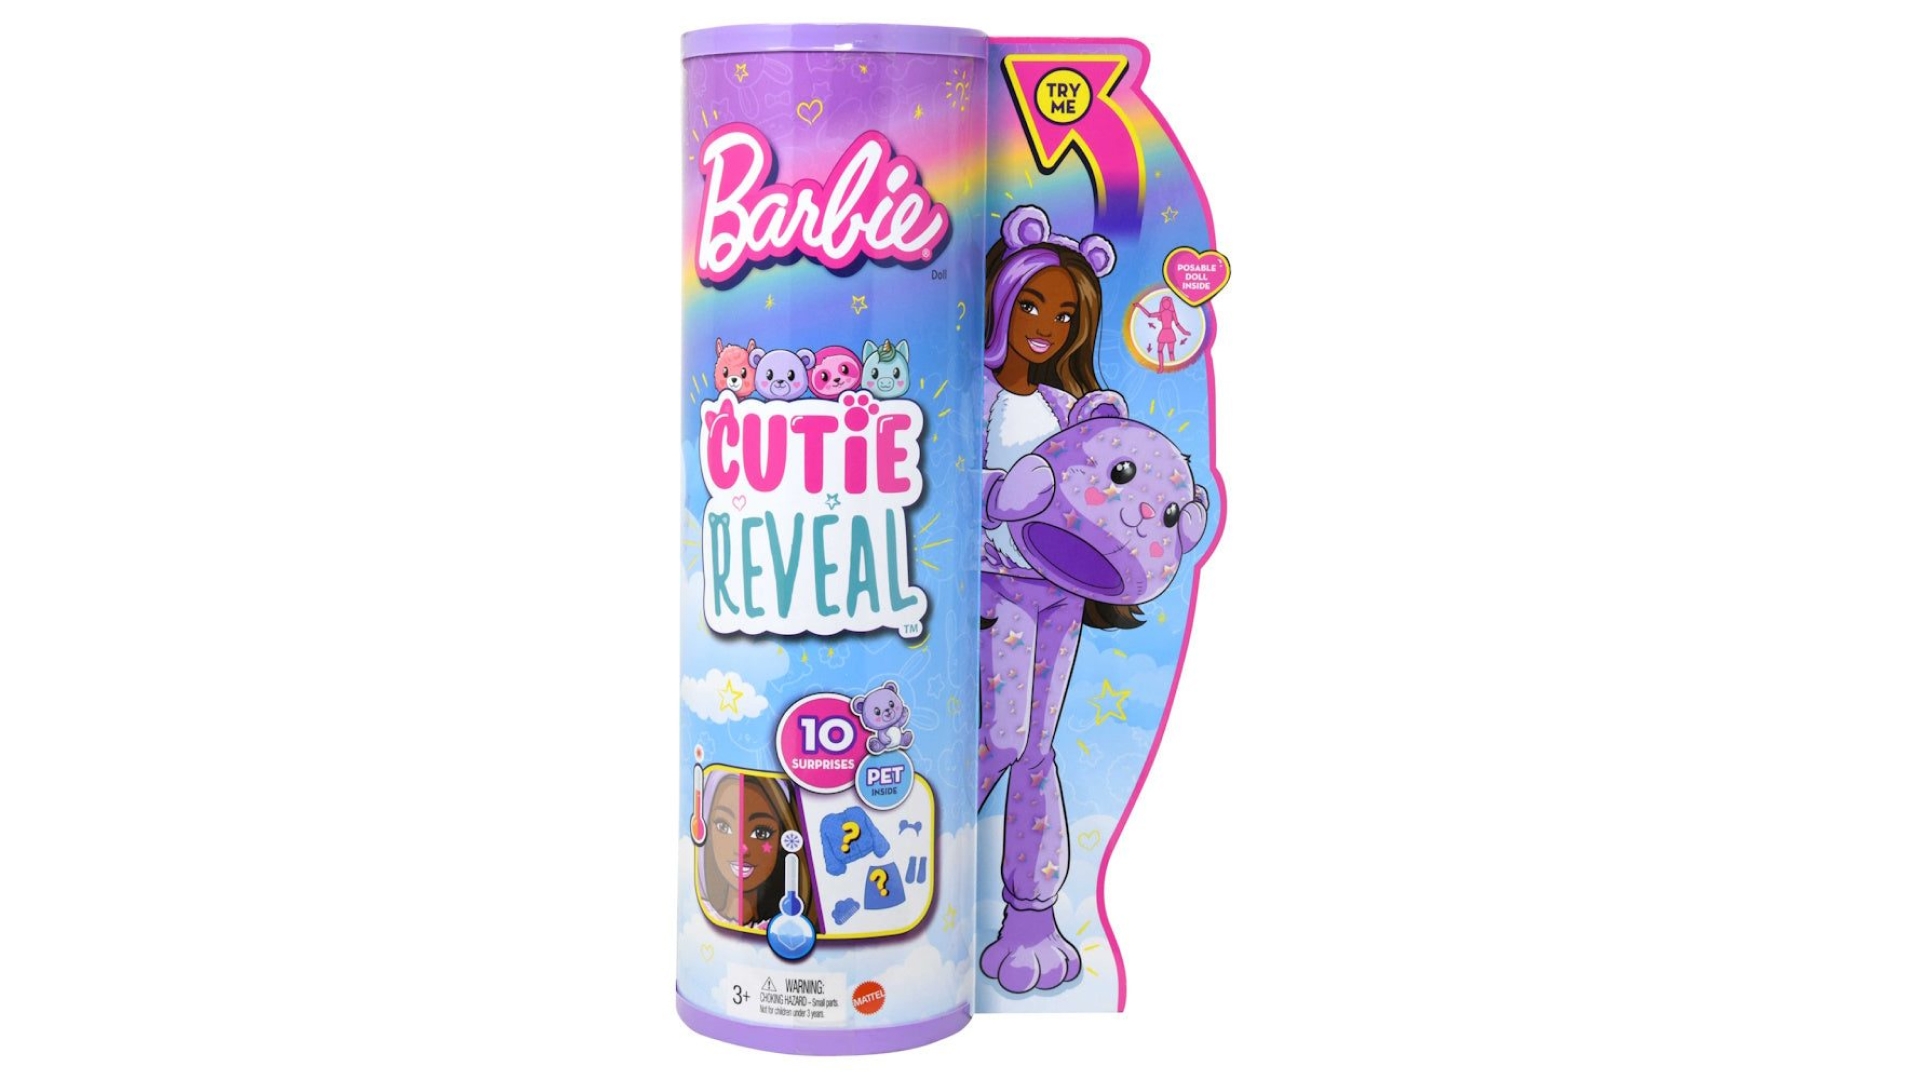 Barbie Cutie Reveal Doll unboxed, revealing a plush animal costume concealing the Barbie doll underneath.